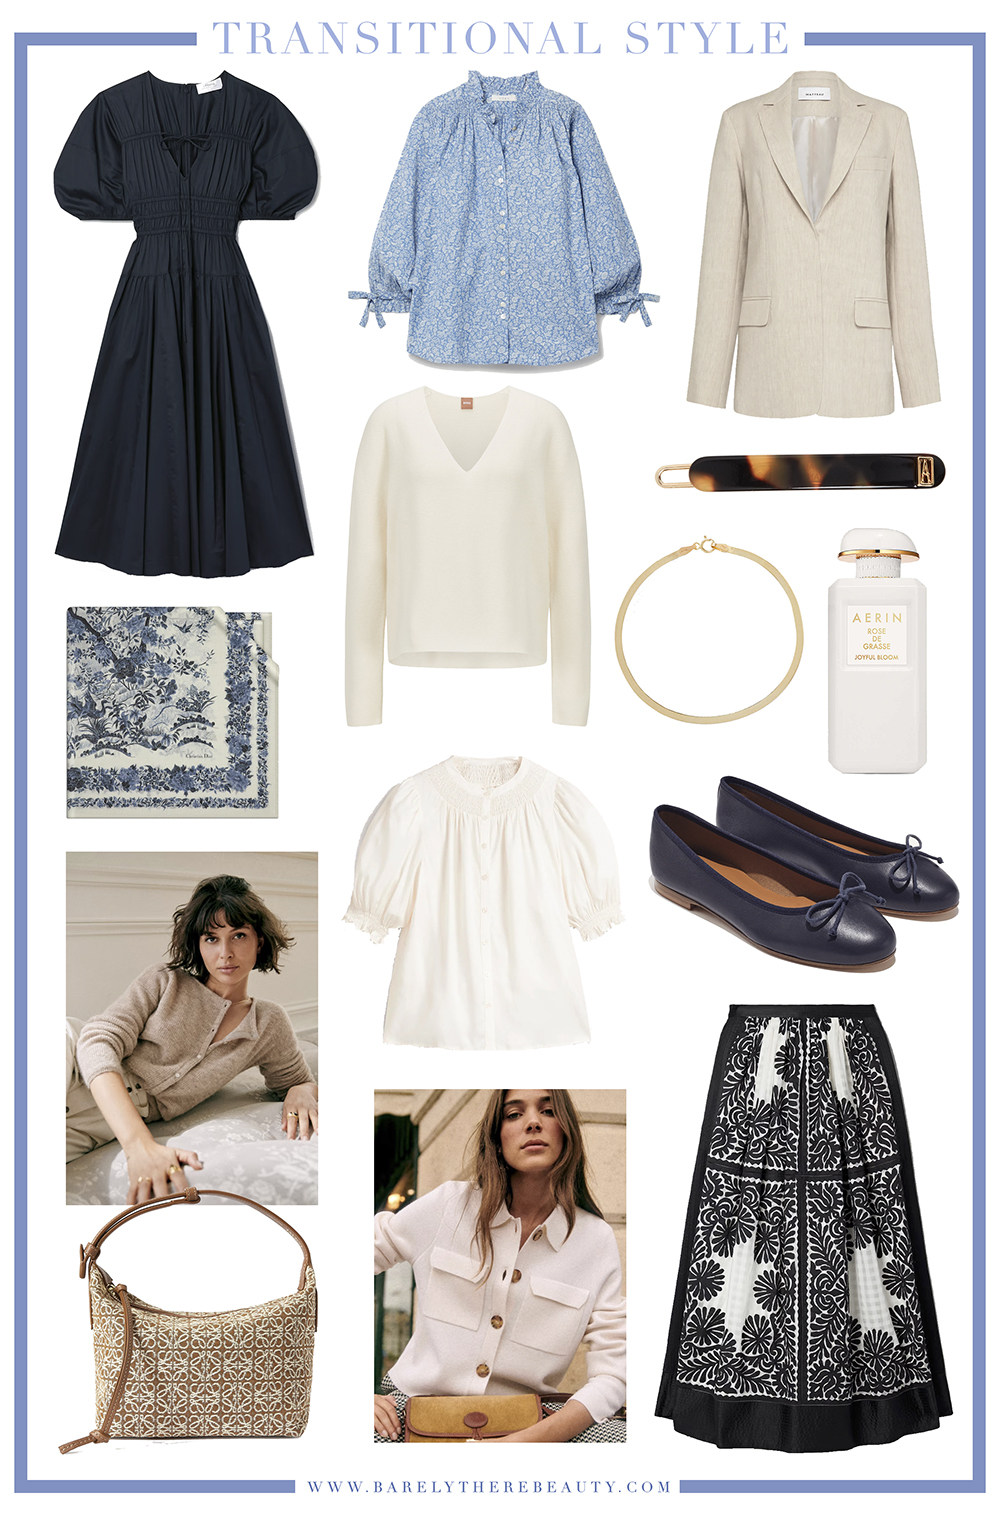 Transitional-classic-style-moodboard-inspiration